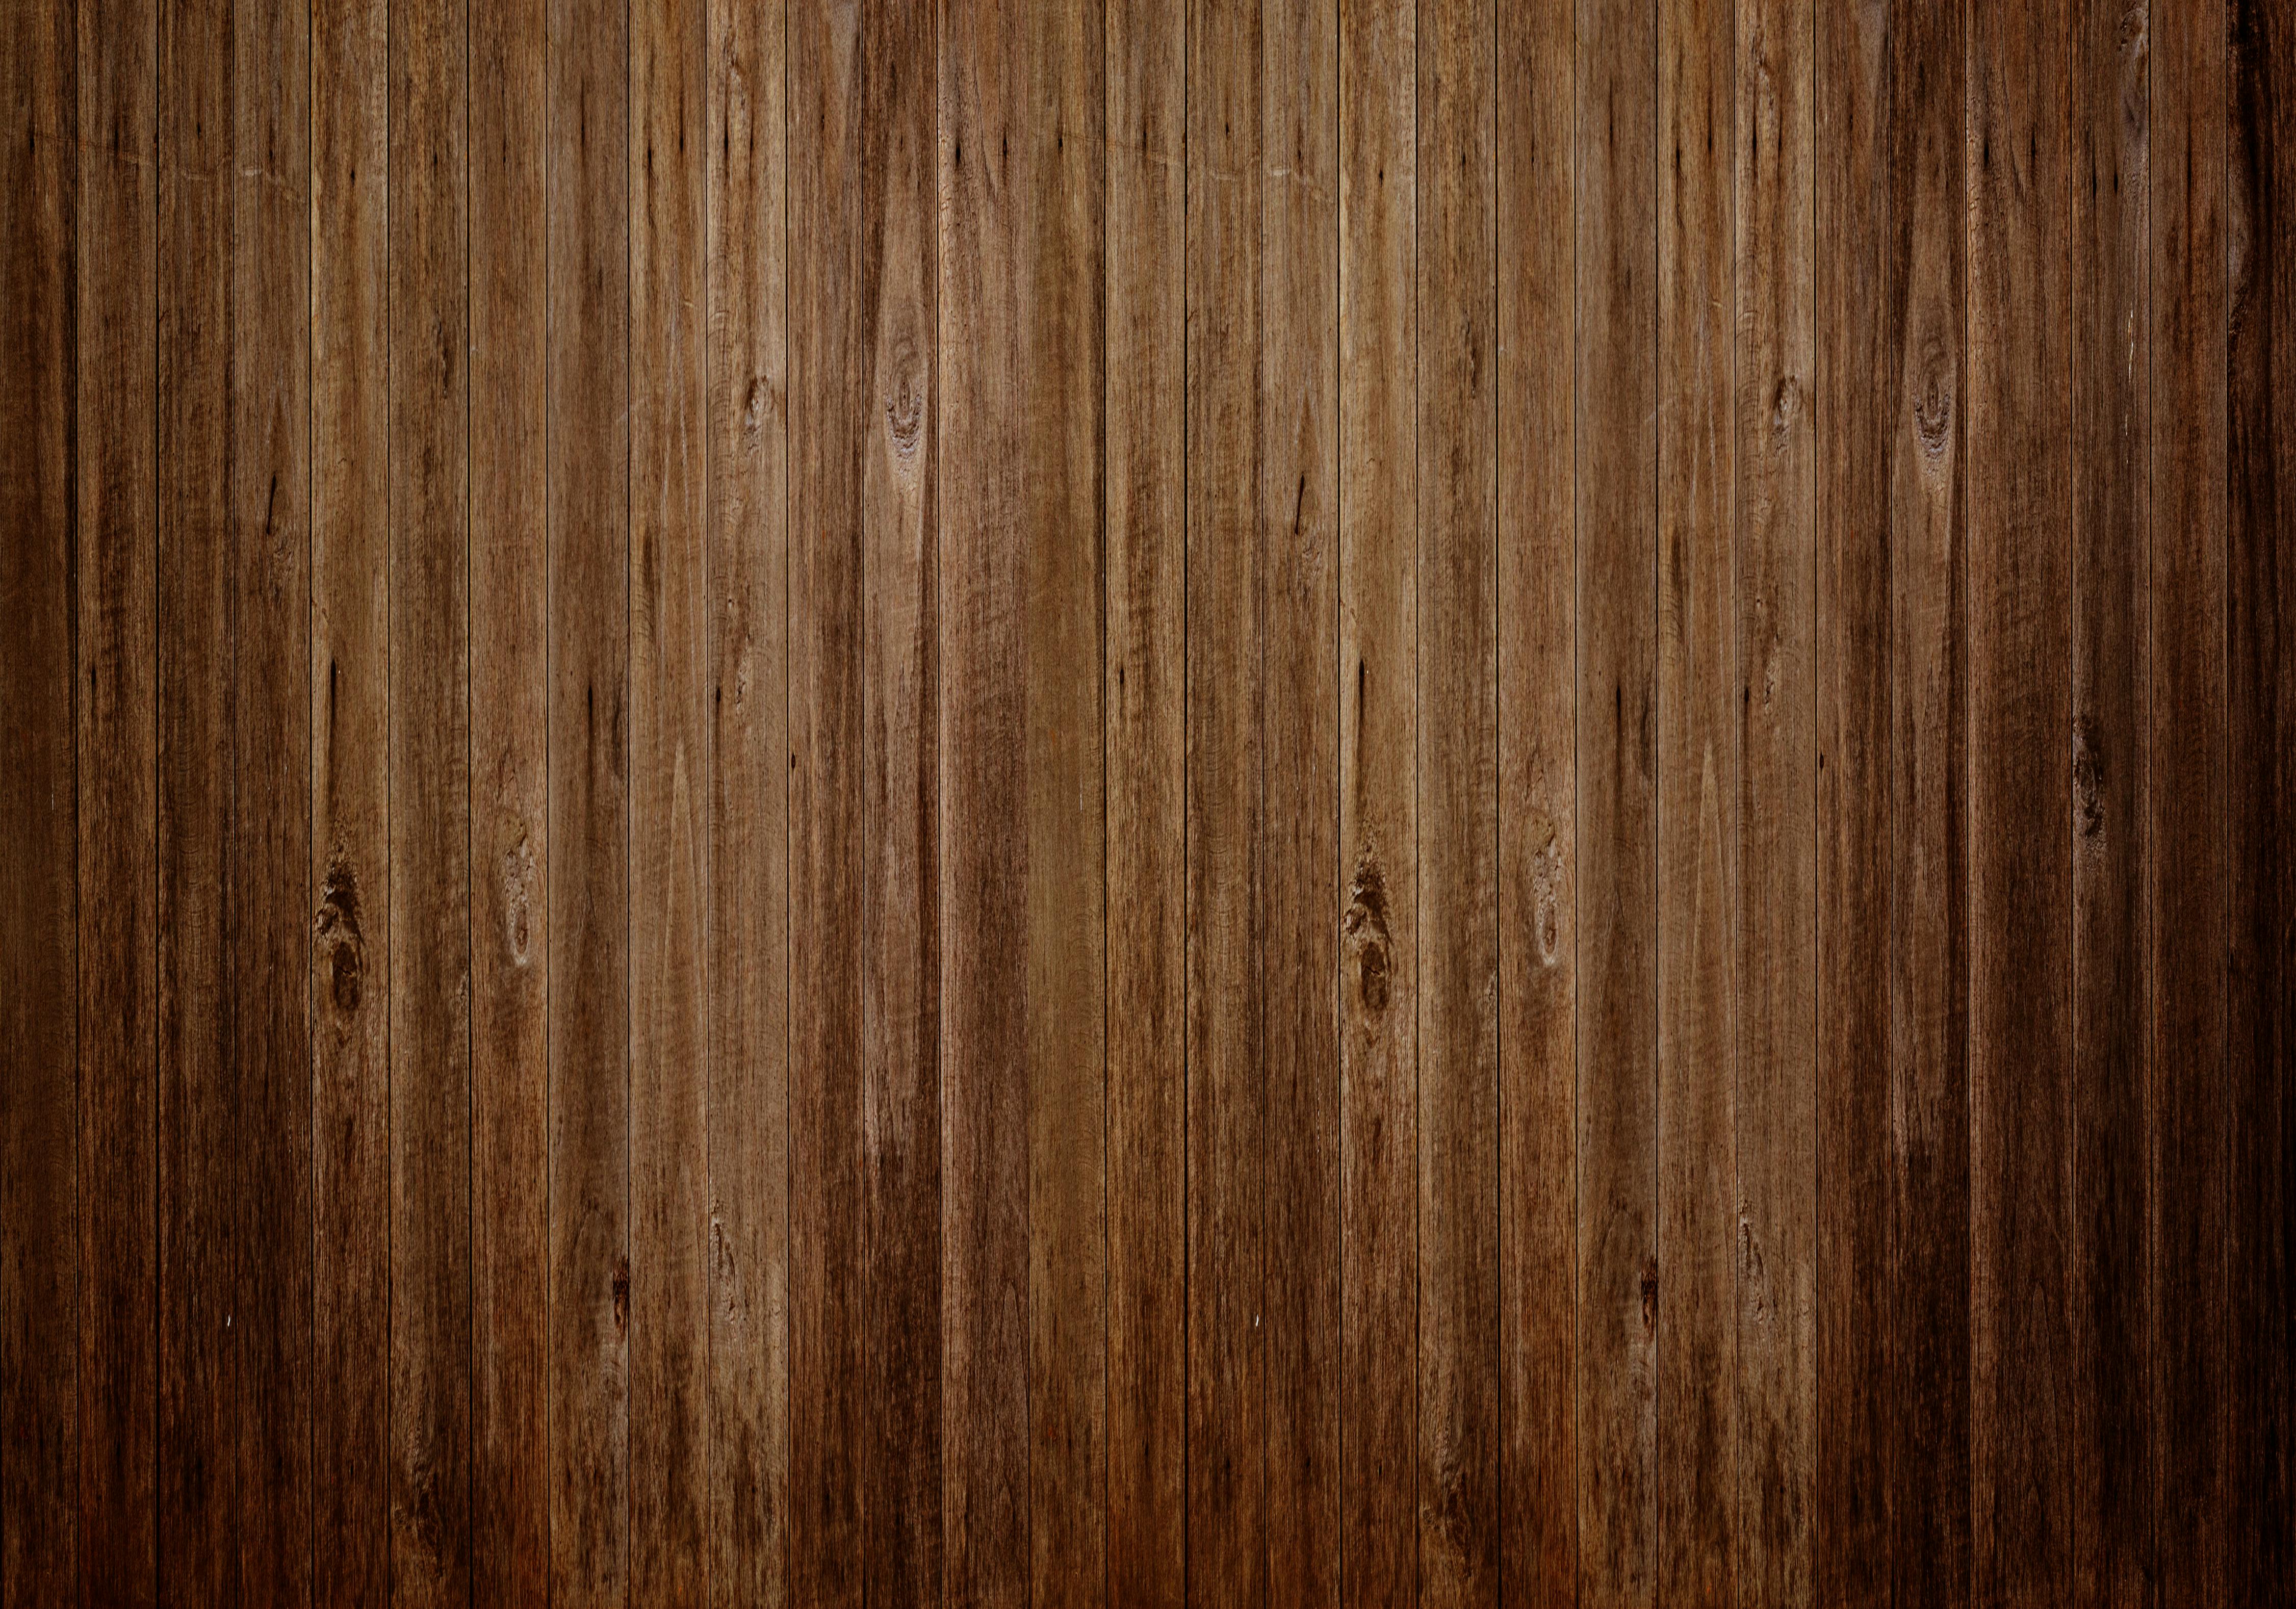 Brown and Black Wooden Surface